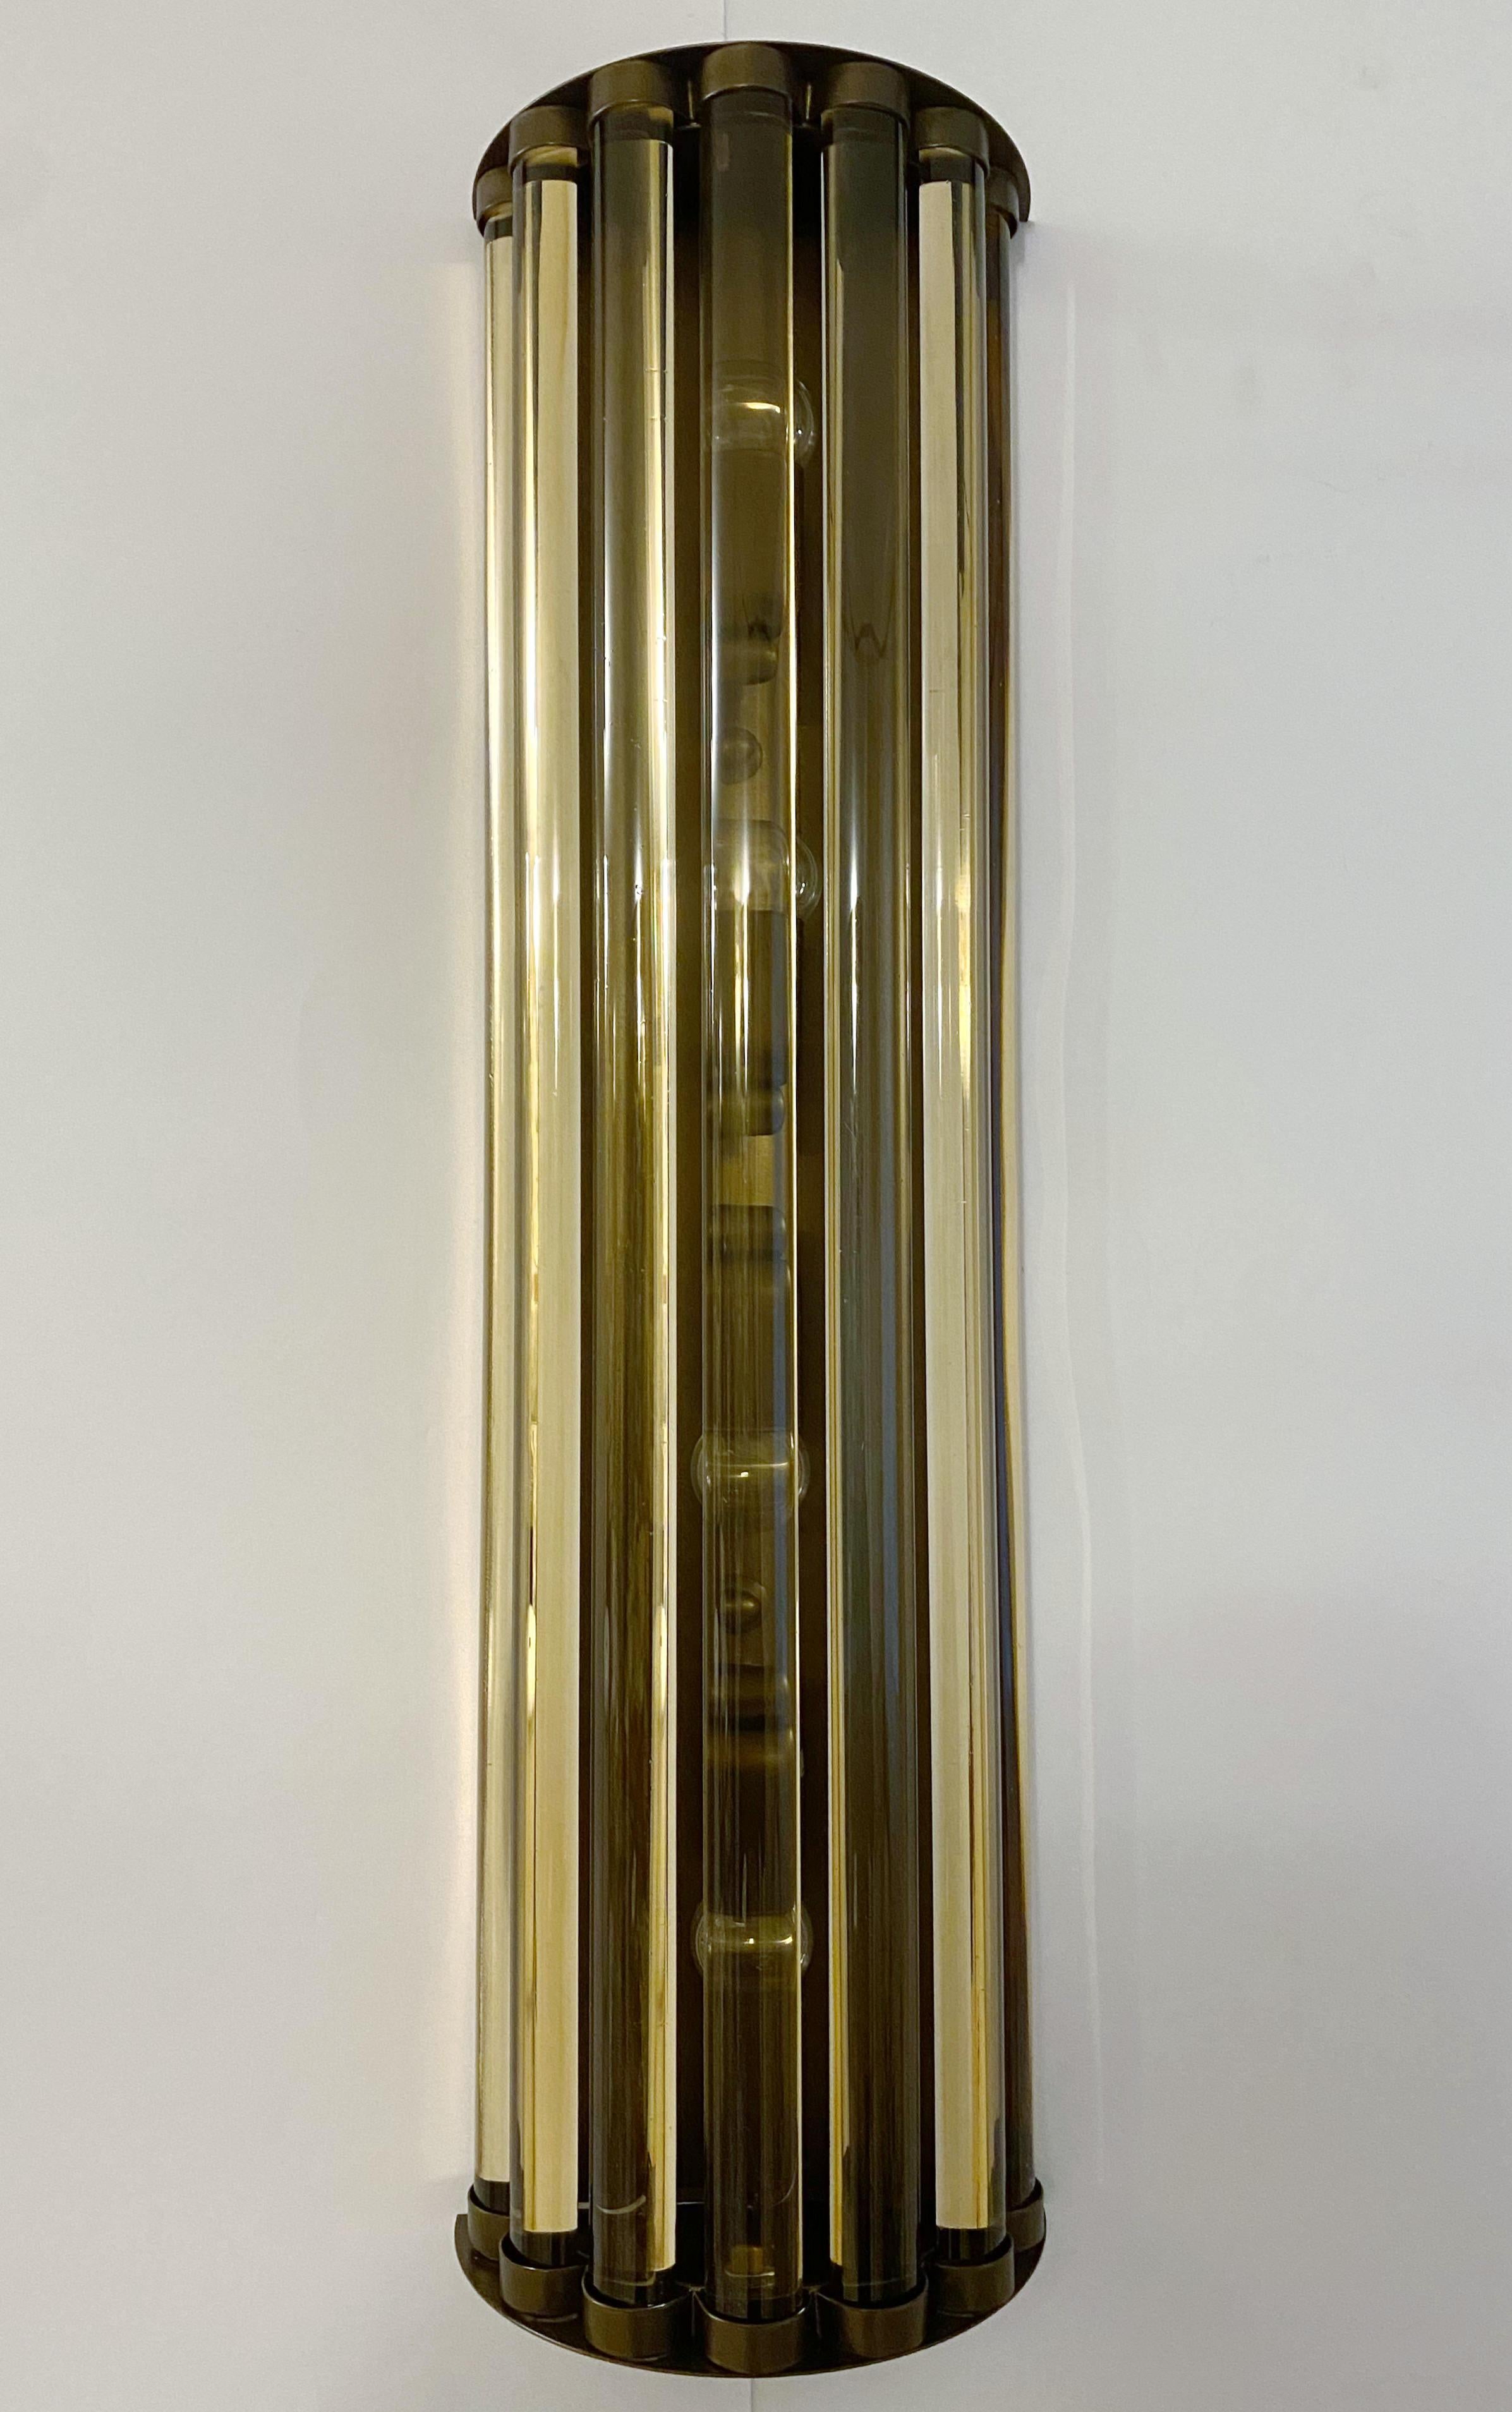 Italian wall light or flush mount with smoky colored long crystal bars mounted on bronzed metal finish / Designed by Fabio Bergomi for Fabio Ltd / Made in Italy
4 lights / E12 or E14 type / max 40W each
Measures: Height 28 inches / Width 8 inches /